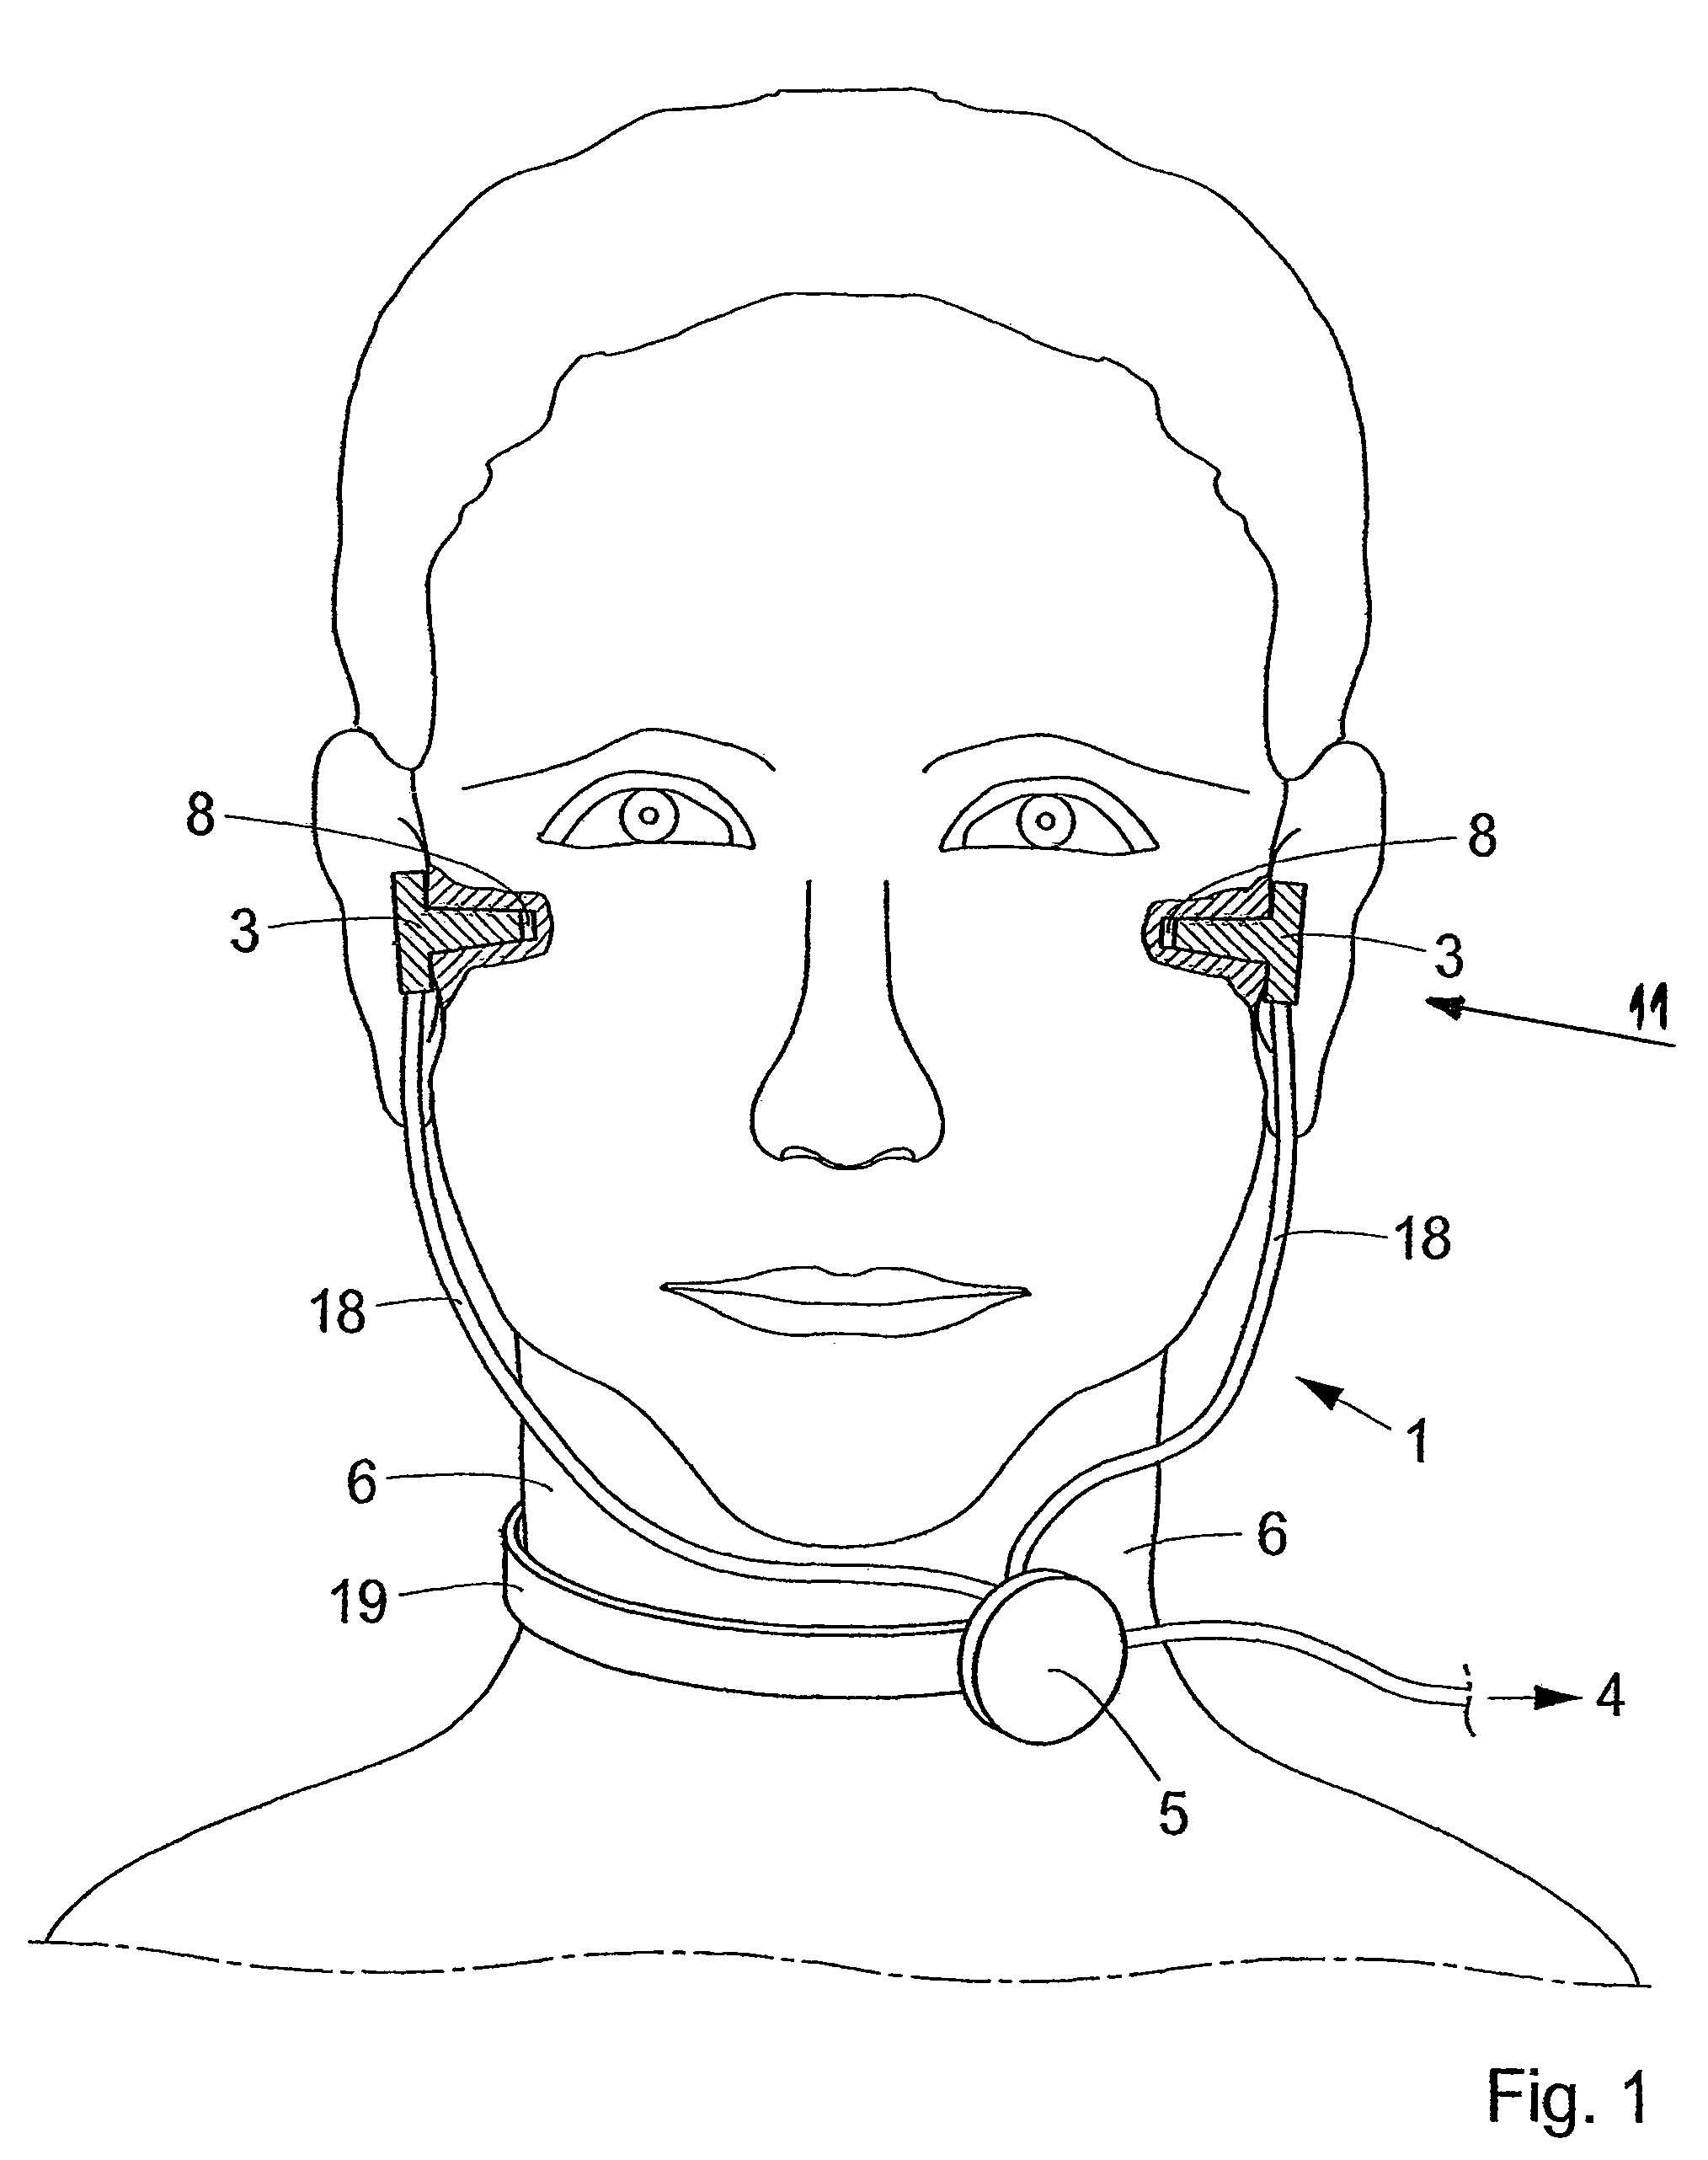 Noise damping headset with a throat microphone